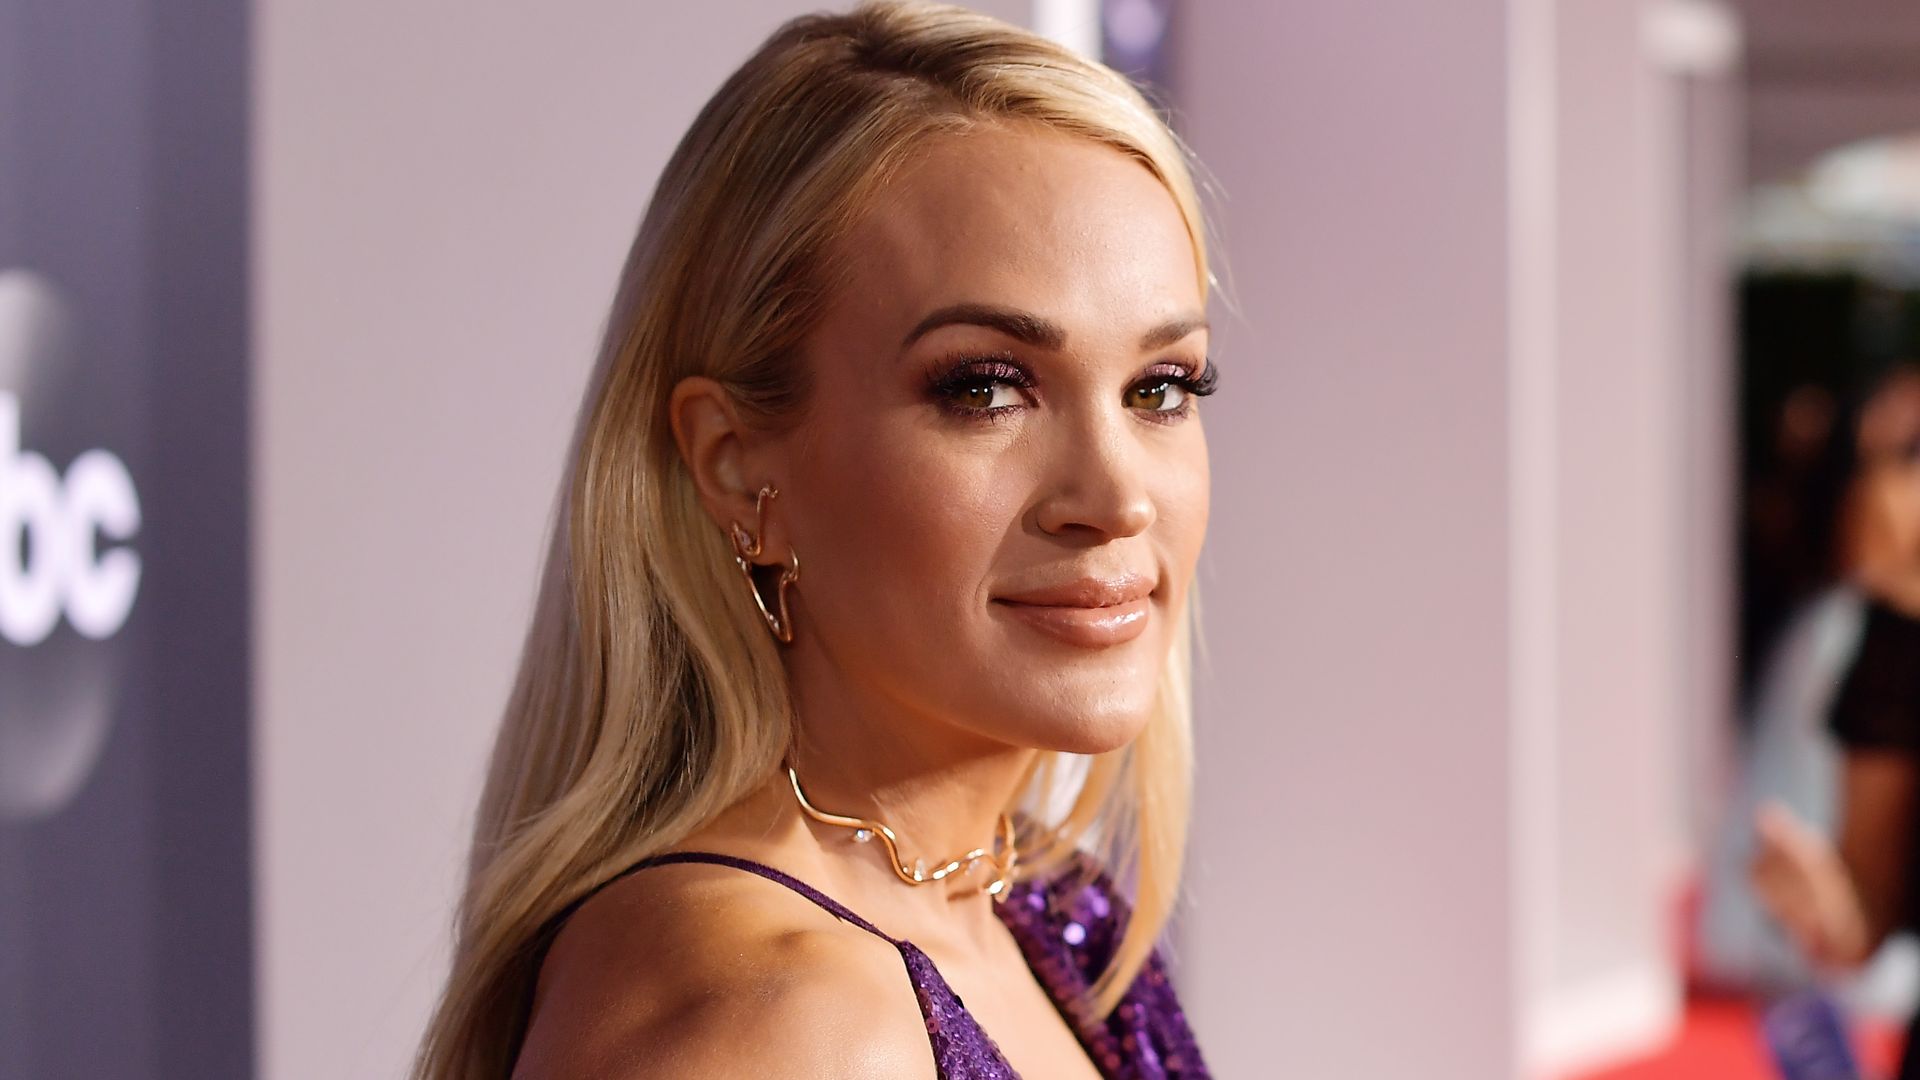 Carrie Underwood attends the 2019 American Music Awards